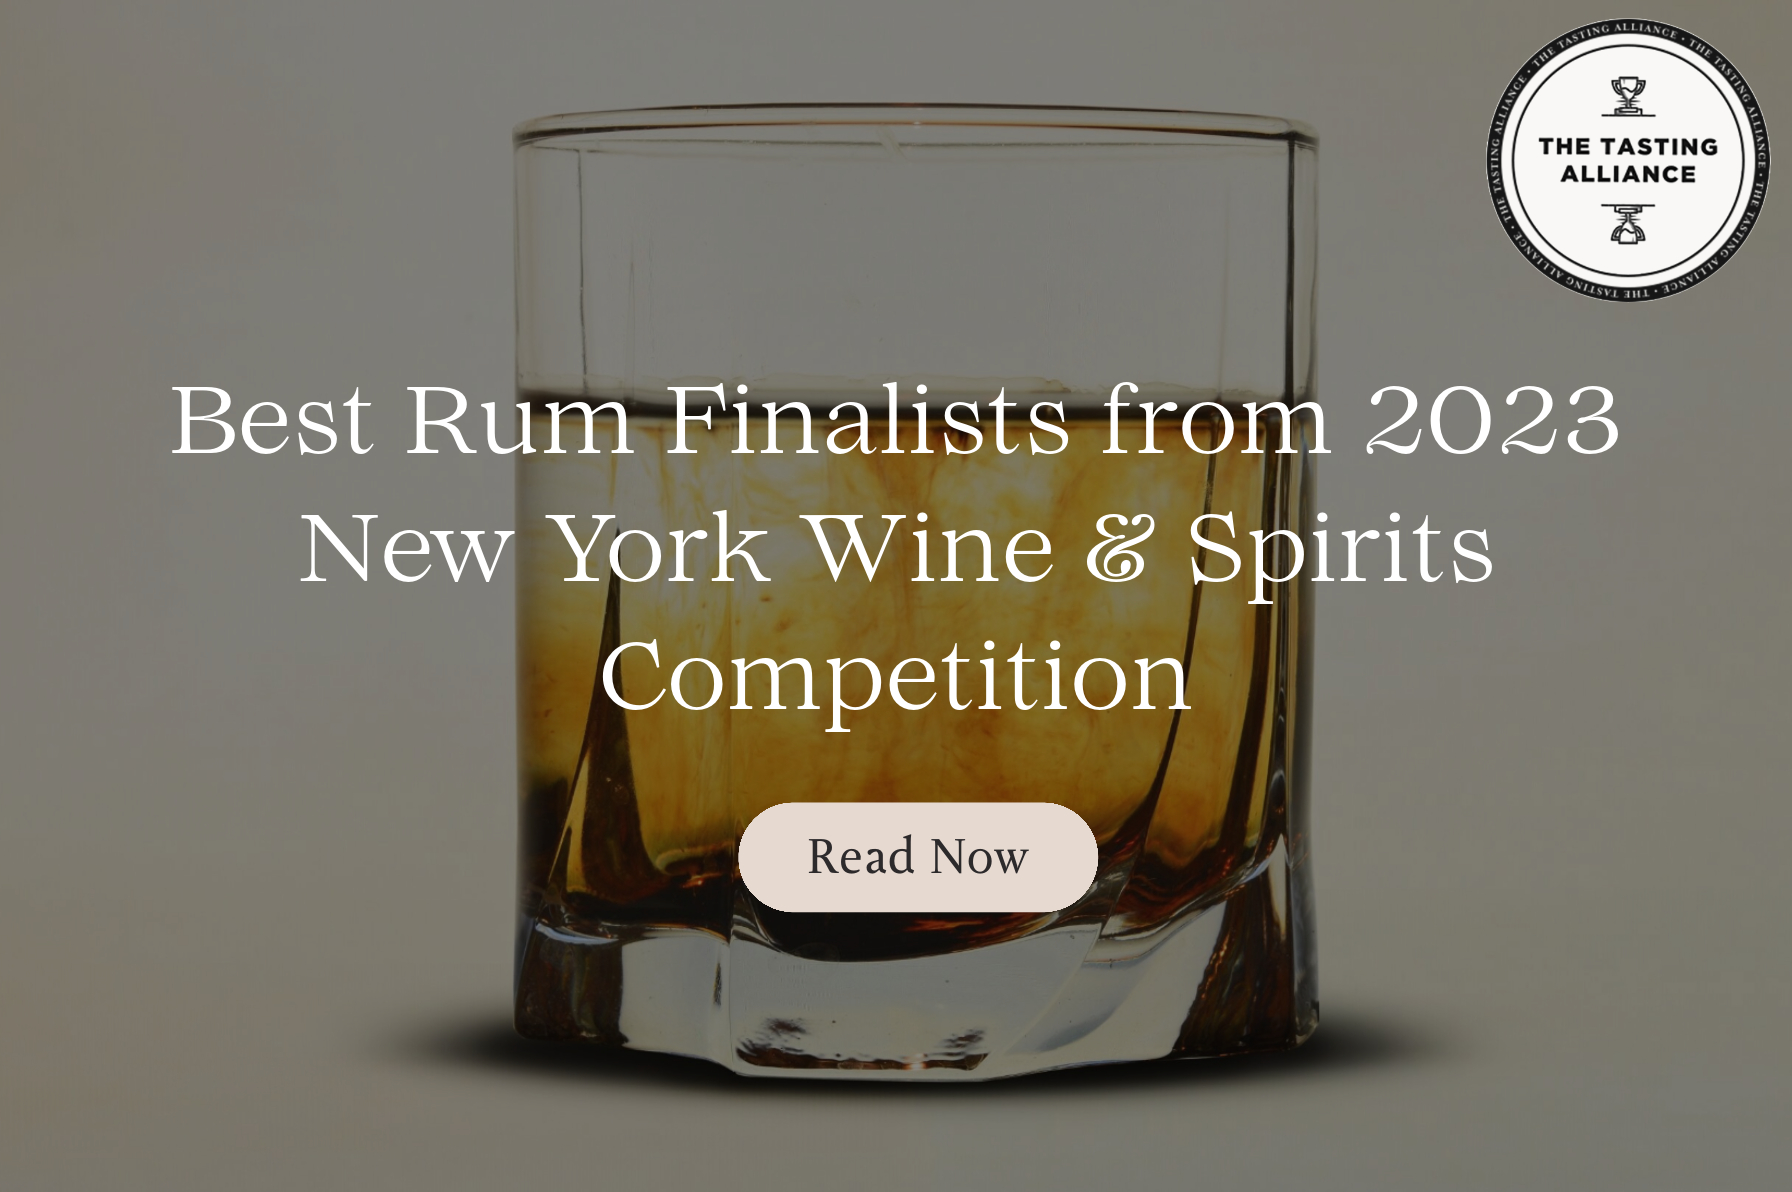 The Tasting Alliance's Best Rum from 2023 New York World Wine & Spirits Competition